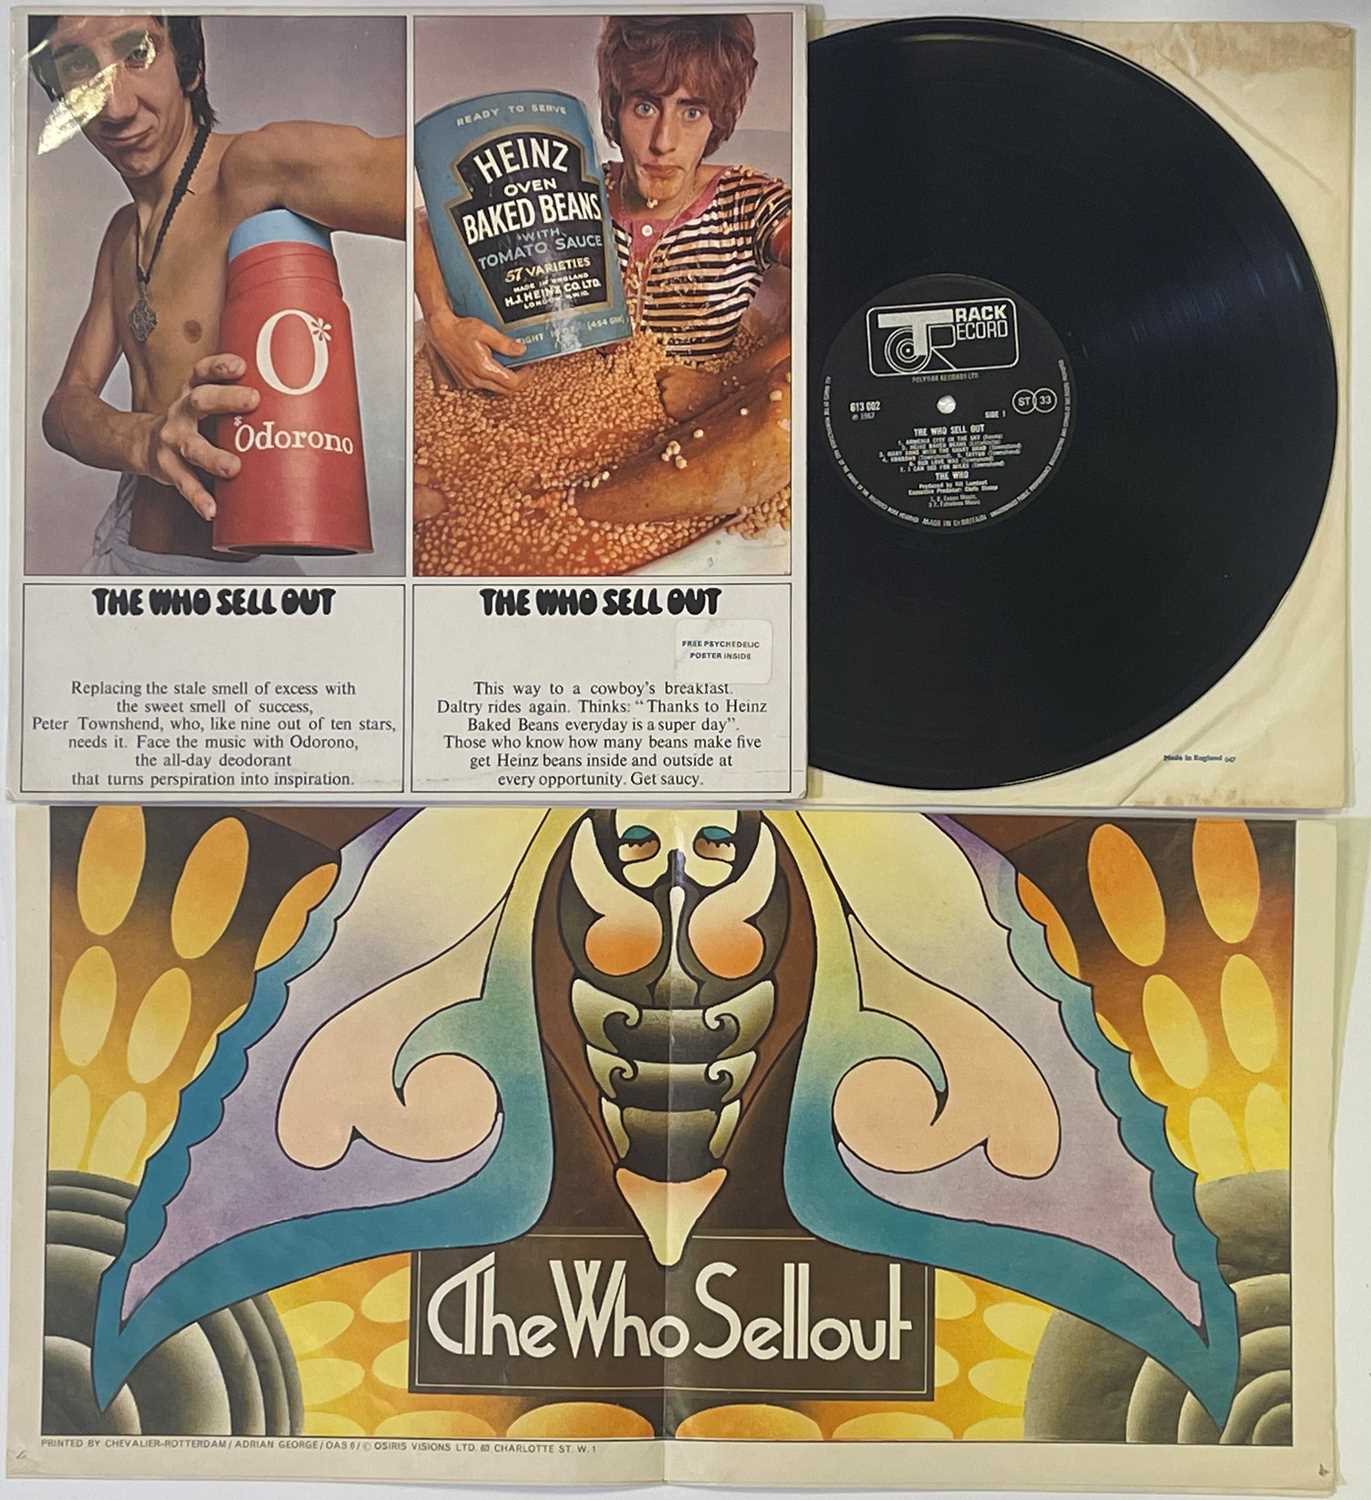 THE WHO - THE WHO SELL OUT LP (ORIGINAL UK COPY COMPLETE WITH POSTER - TRACK 613 002)